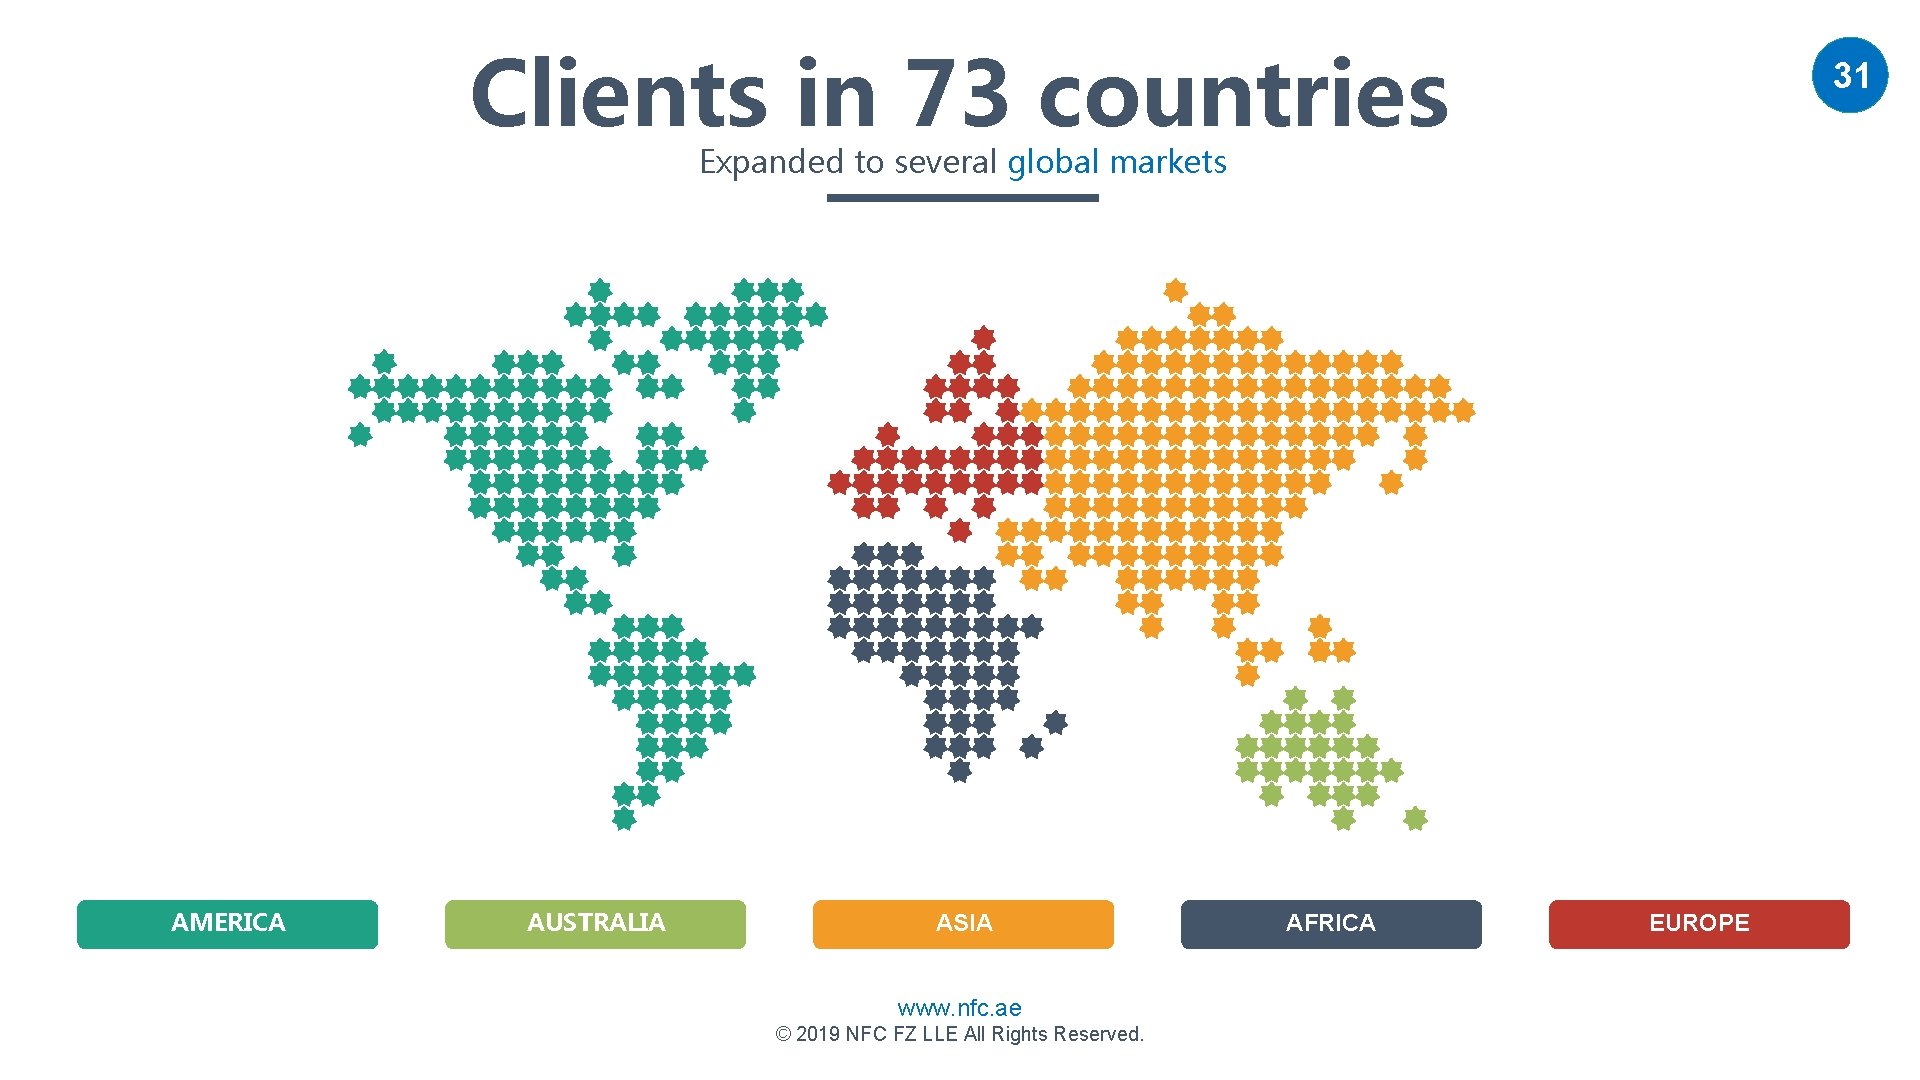 Clients in 73 countries 31 Expanded to several global markets AMERICA AUSTRALIA ASIA www.